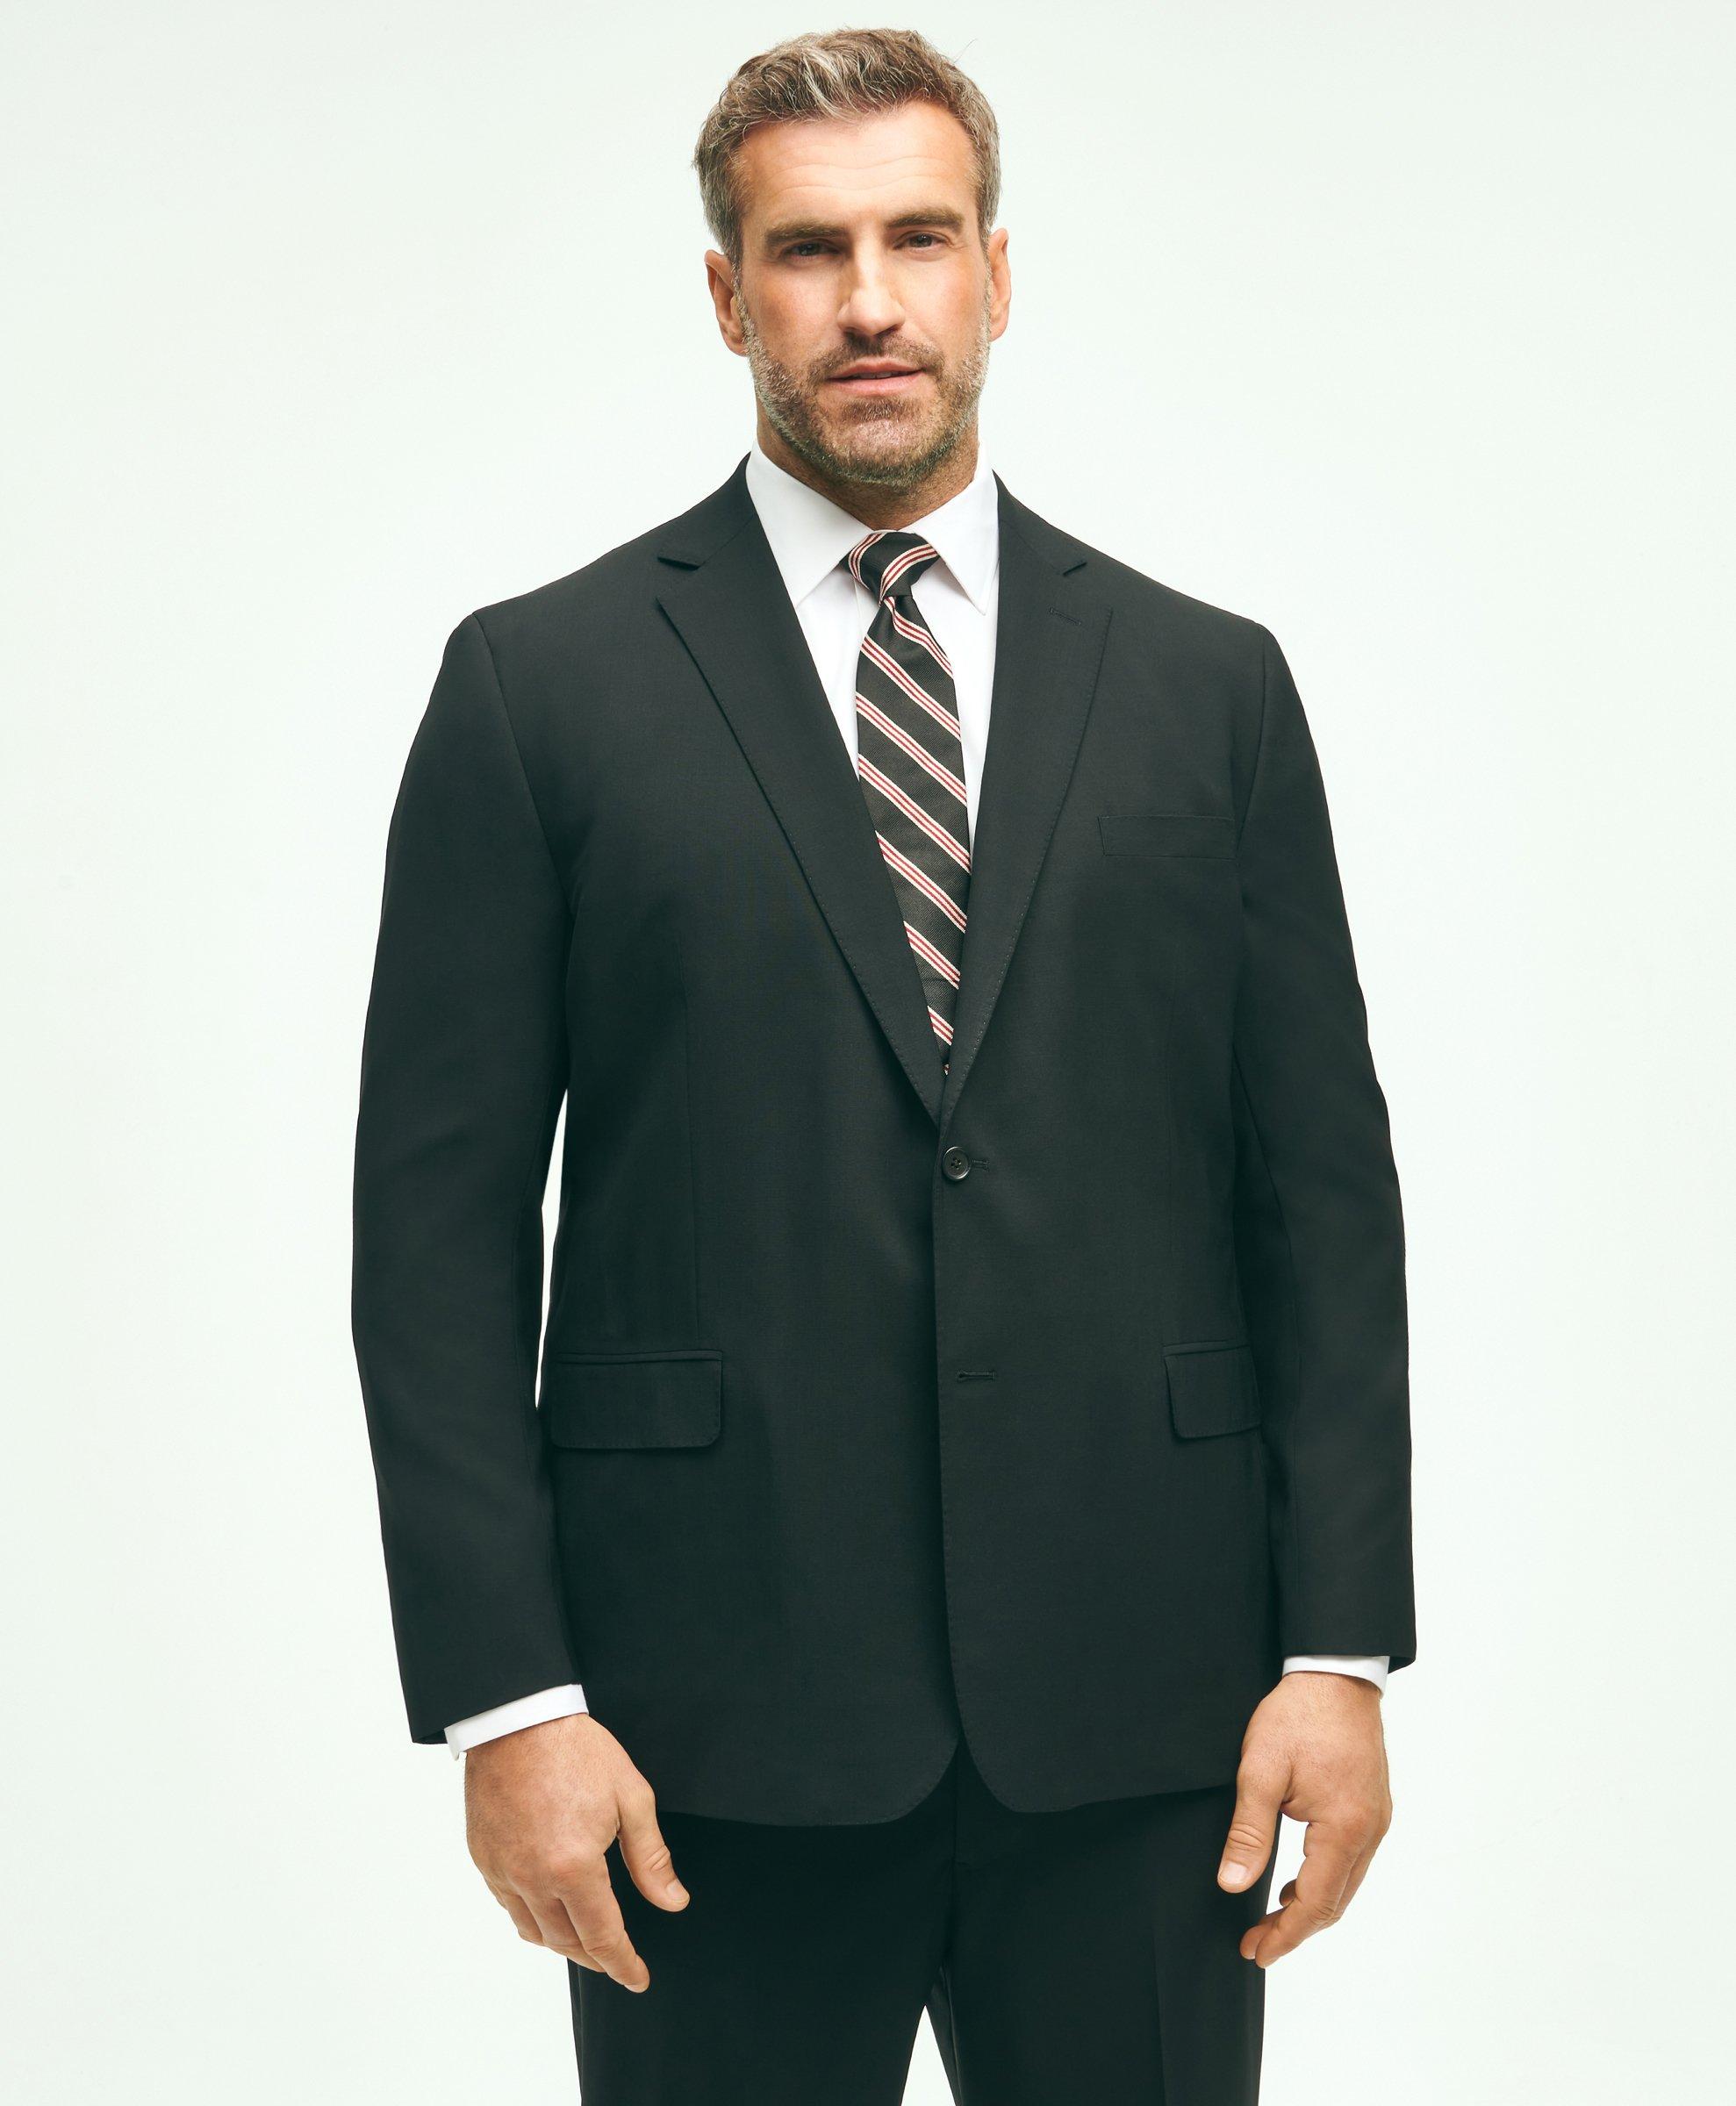 Big & Tall Suits & Clothing, Men's Big & Tall Store